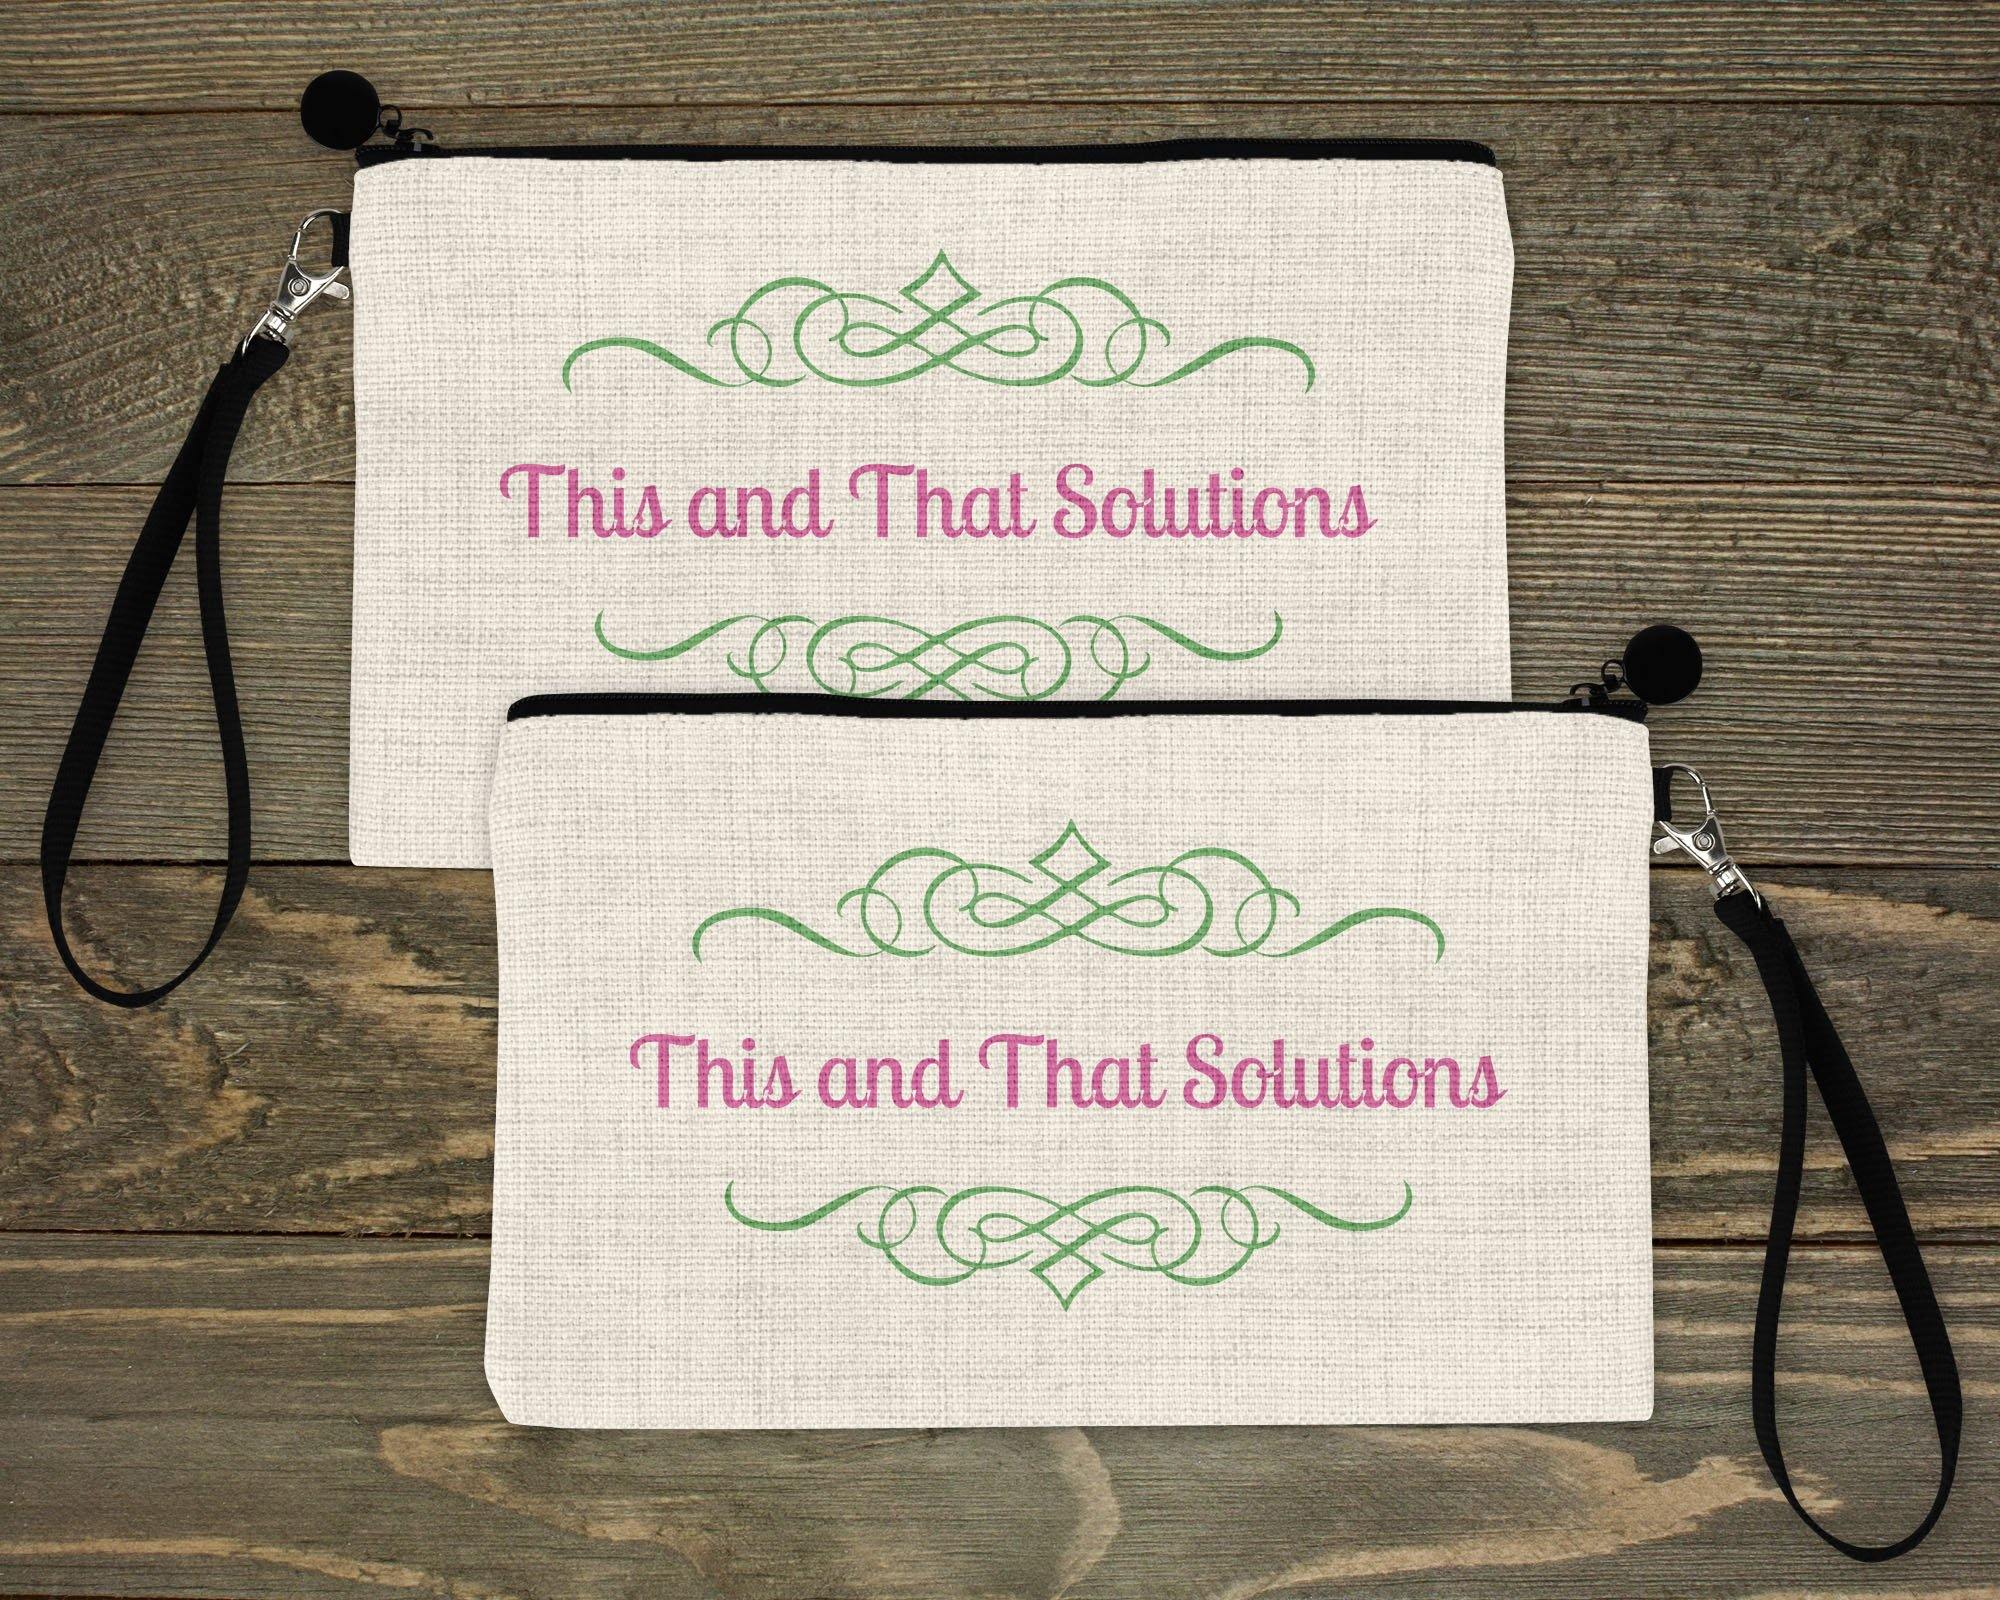 Personalized Cosmetic Bags | Custom Cosmetic Bags | Company Logo - This & That Solutions - Personalized Cosmetic Bags | Custom Cosmetic Bags | Company Logo - Personalized Gifts & Custom Home Decor